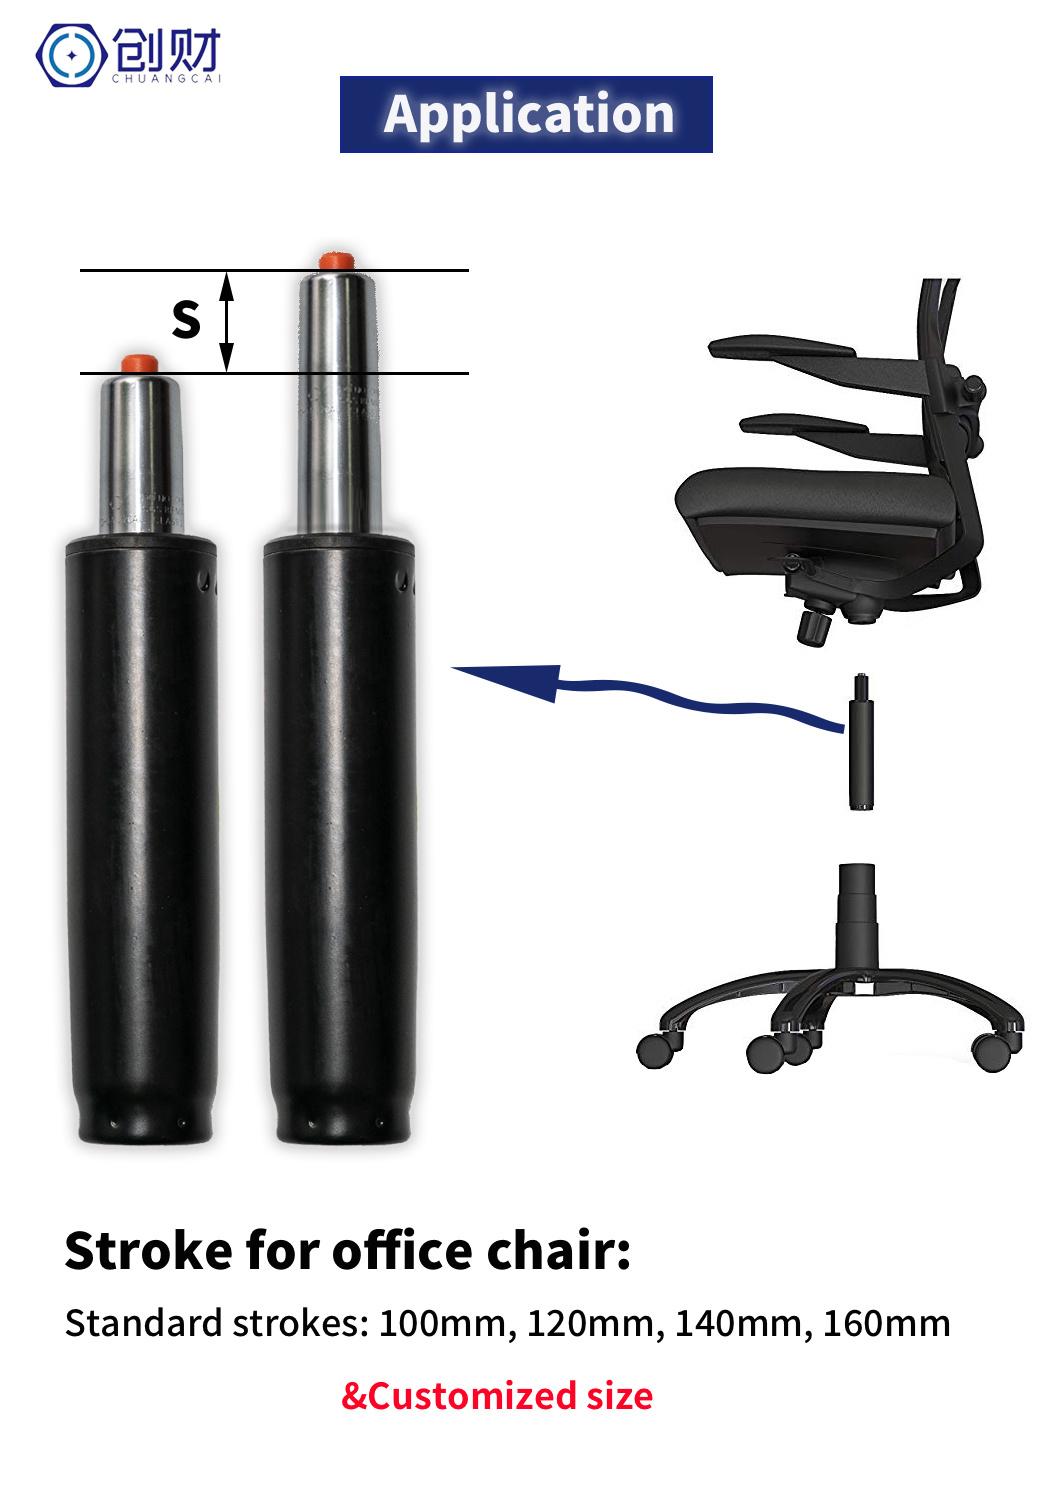 Chromed Gas Lift Spring for Adjustable Office Chairs